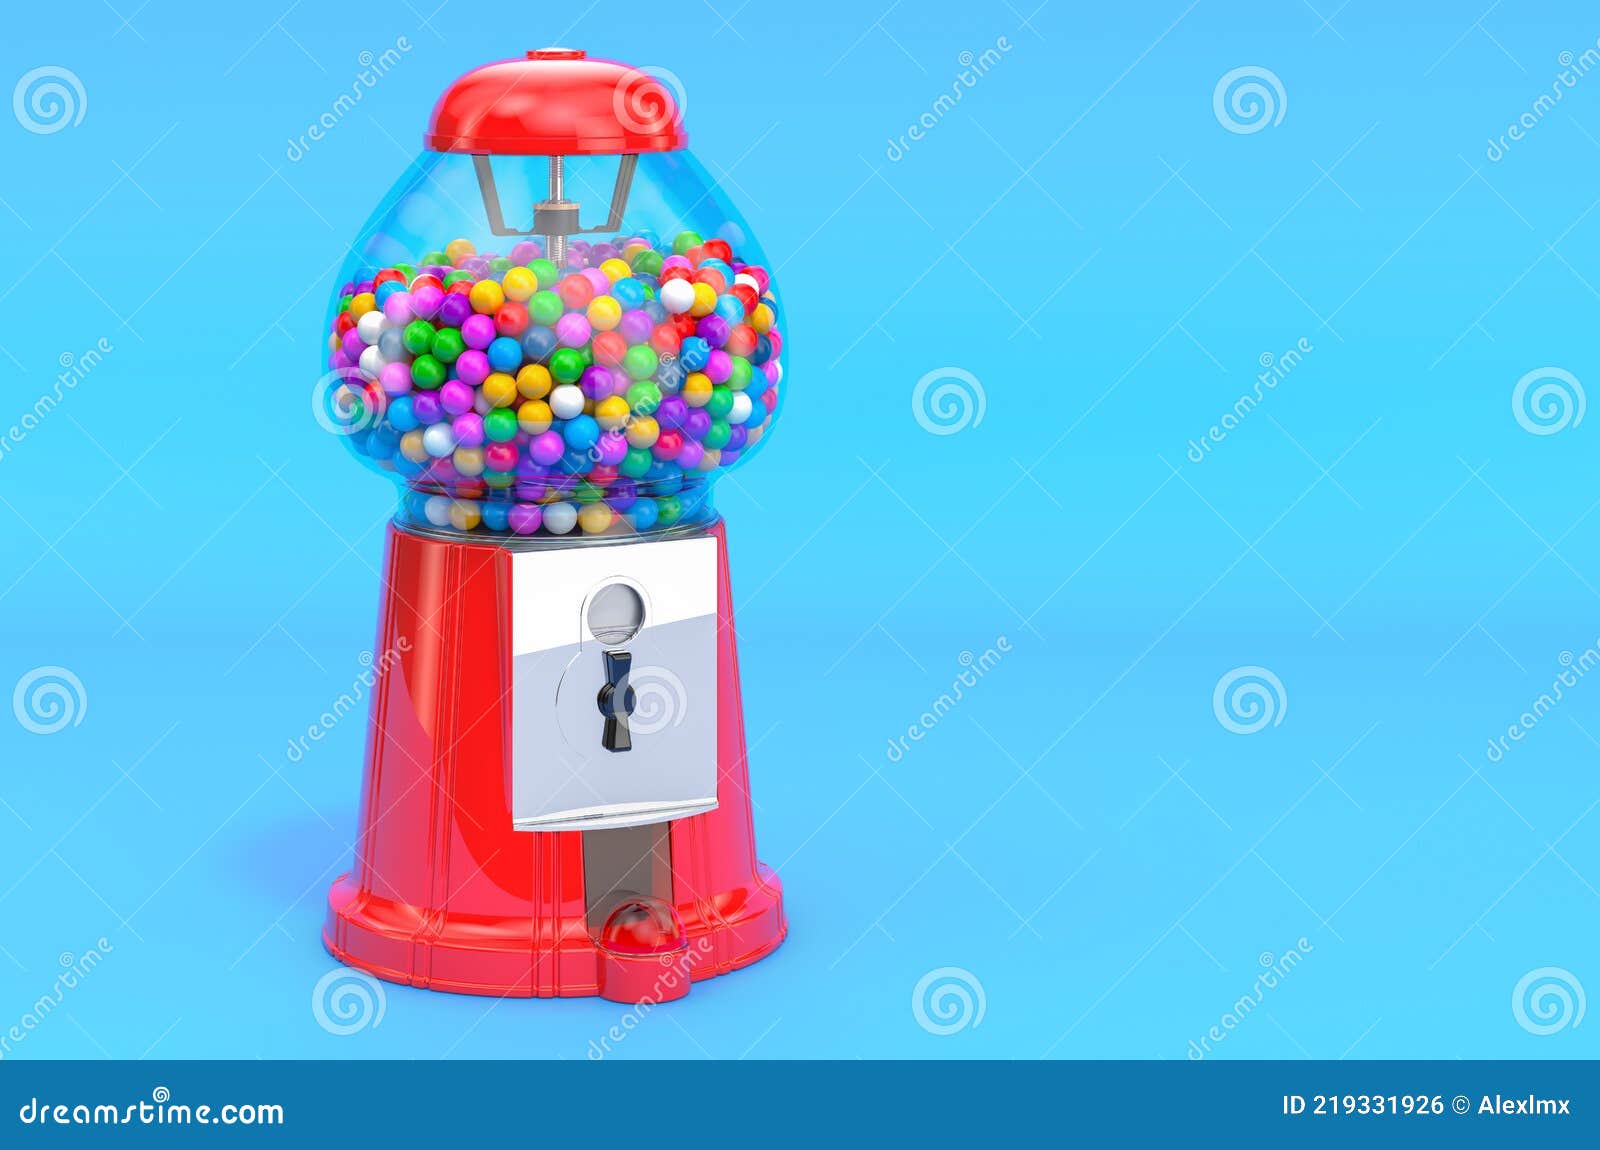 Blue Haired Female Gumball Machine - wide 6